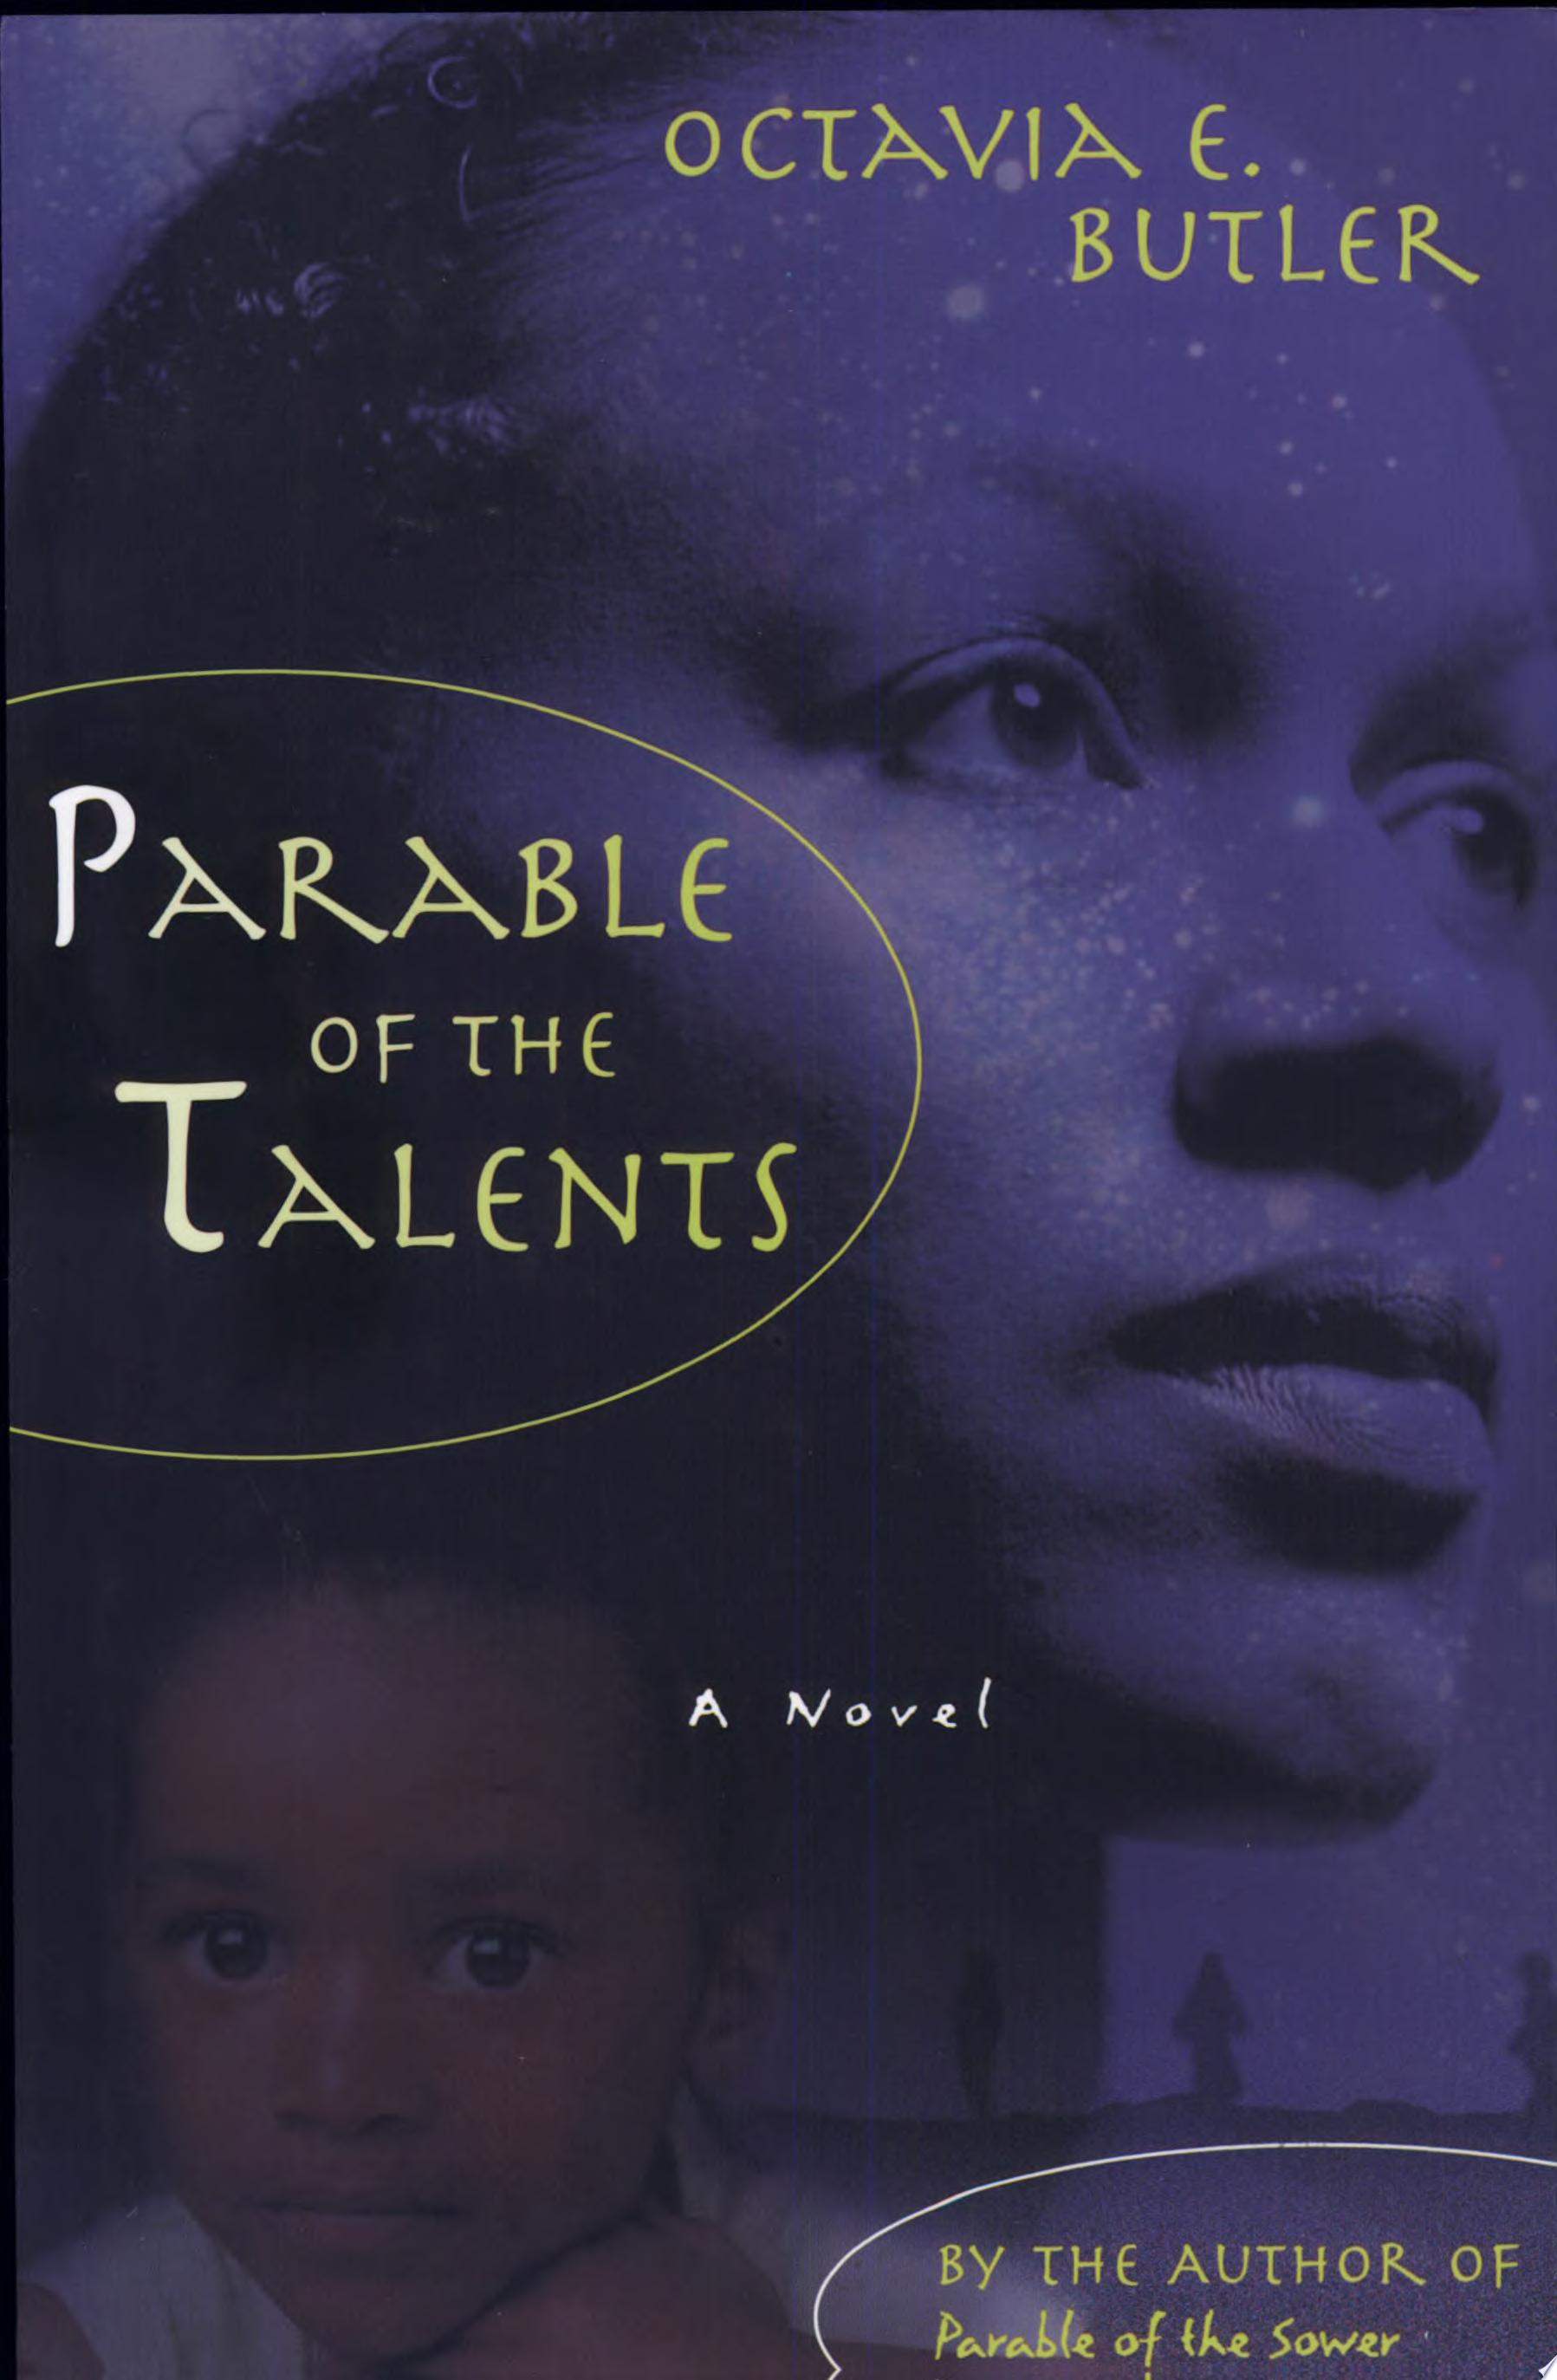 Image for "Parable of the Talents"